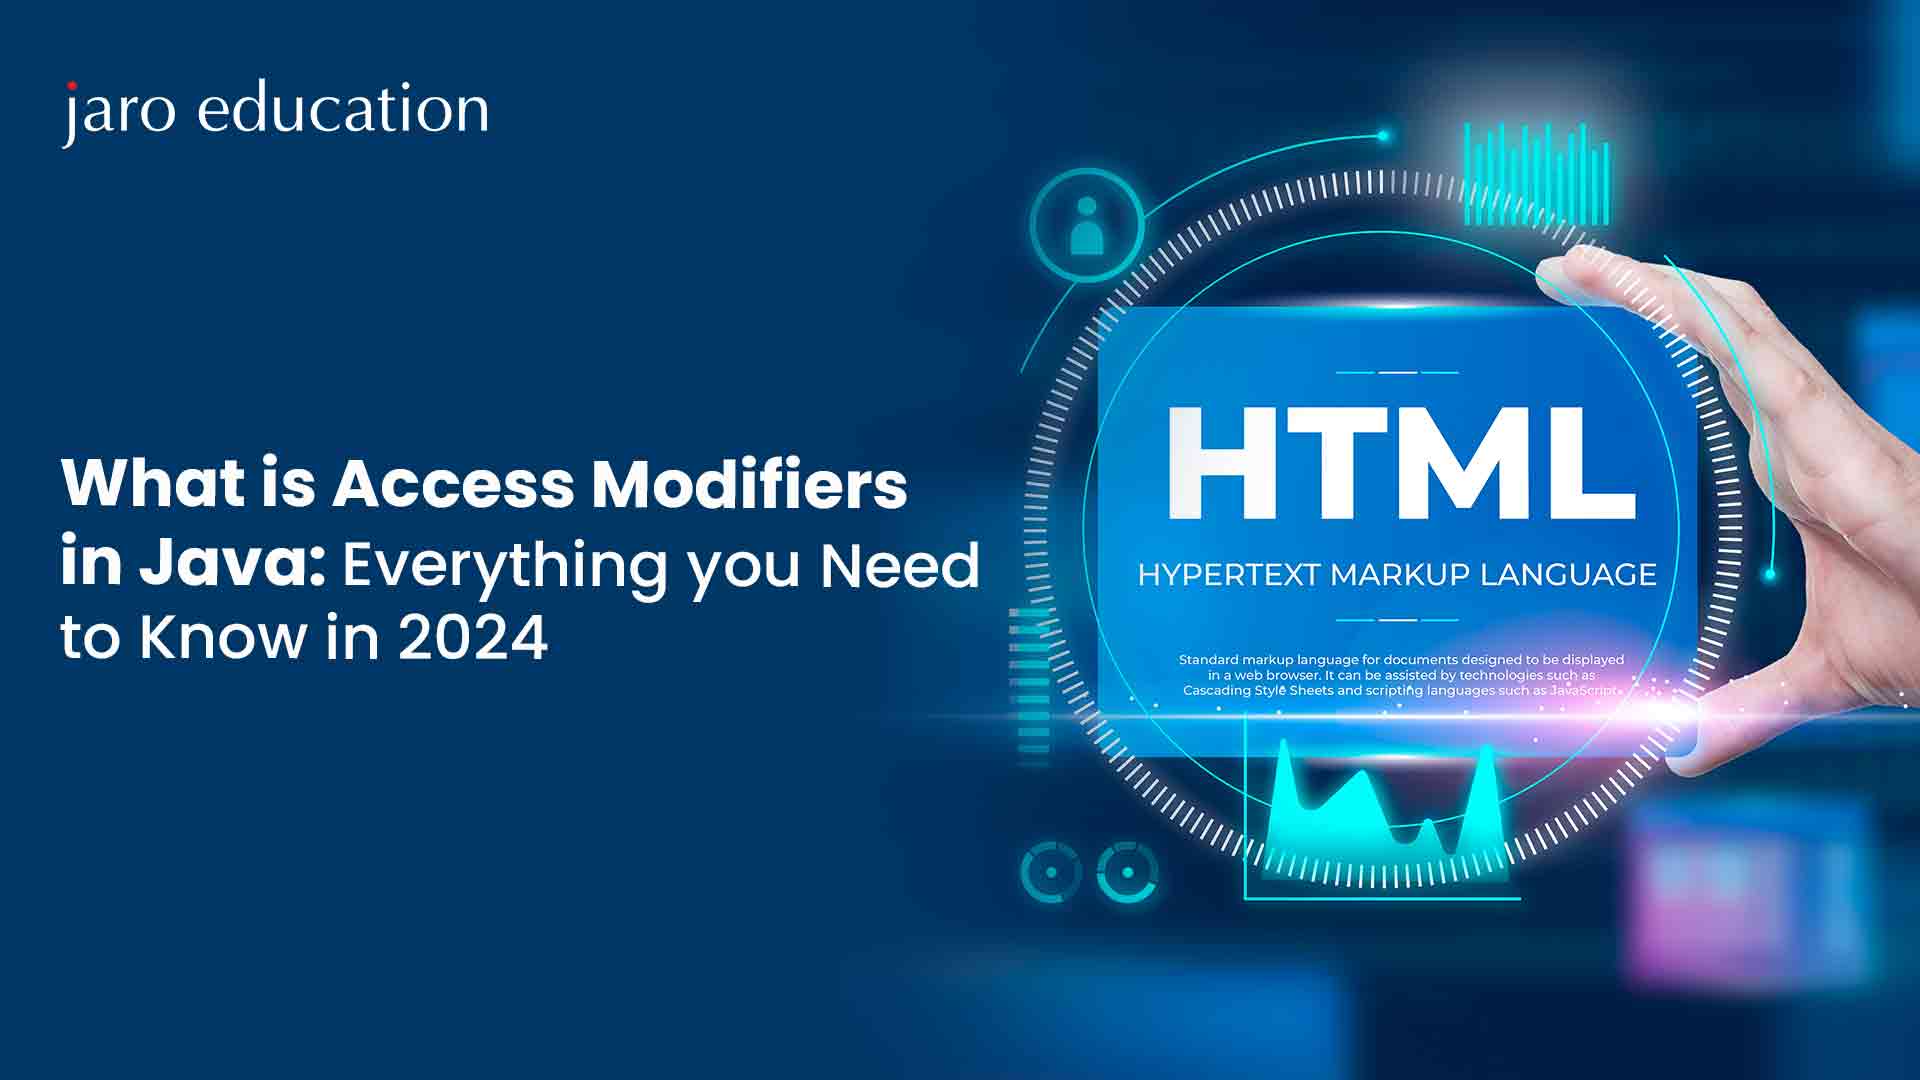 What is Access Modifiers in Java Everything you Need to Know in 2024